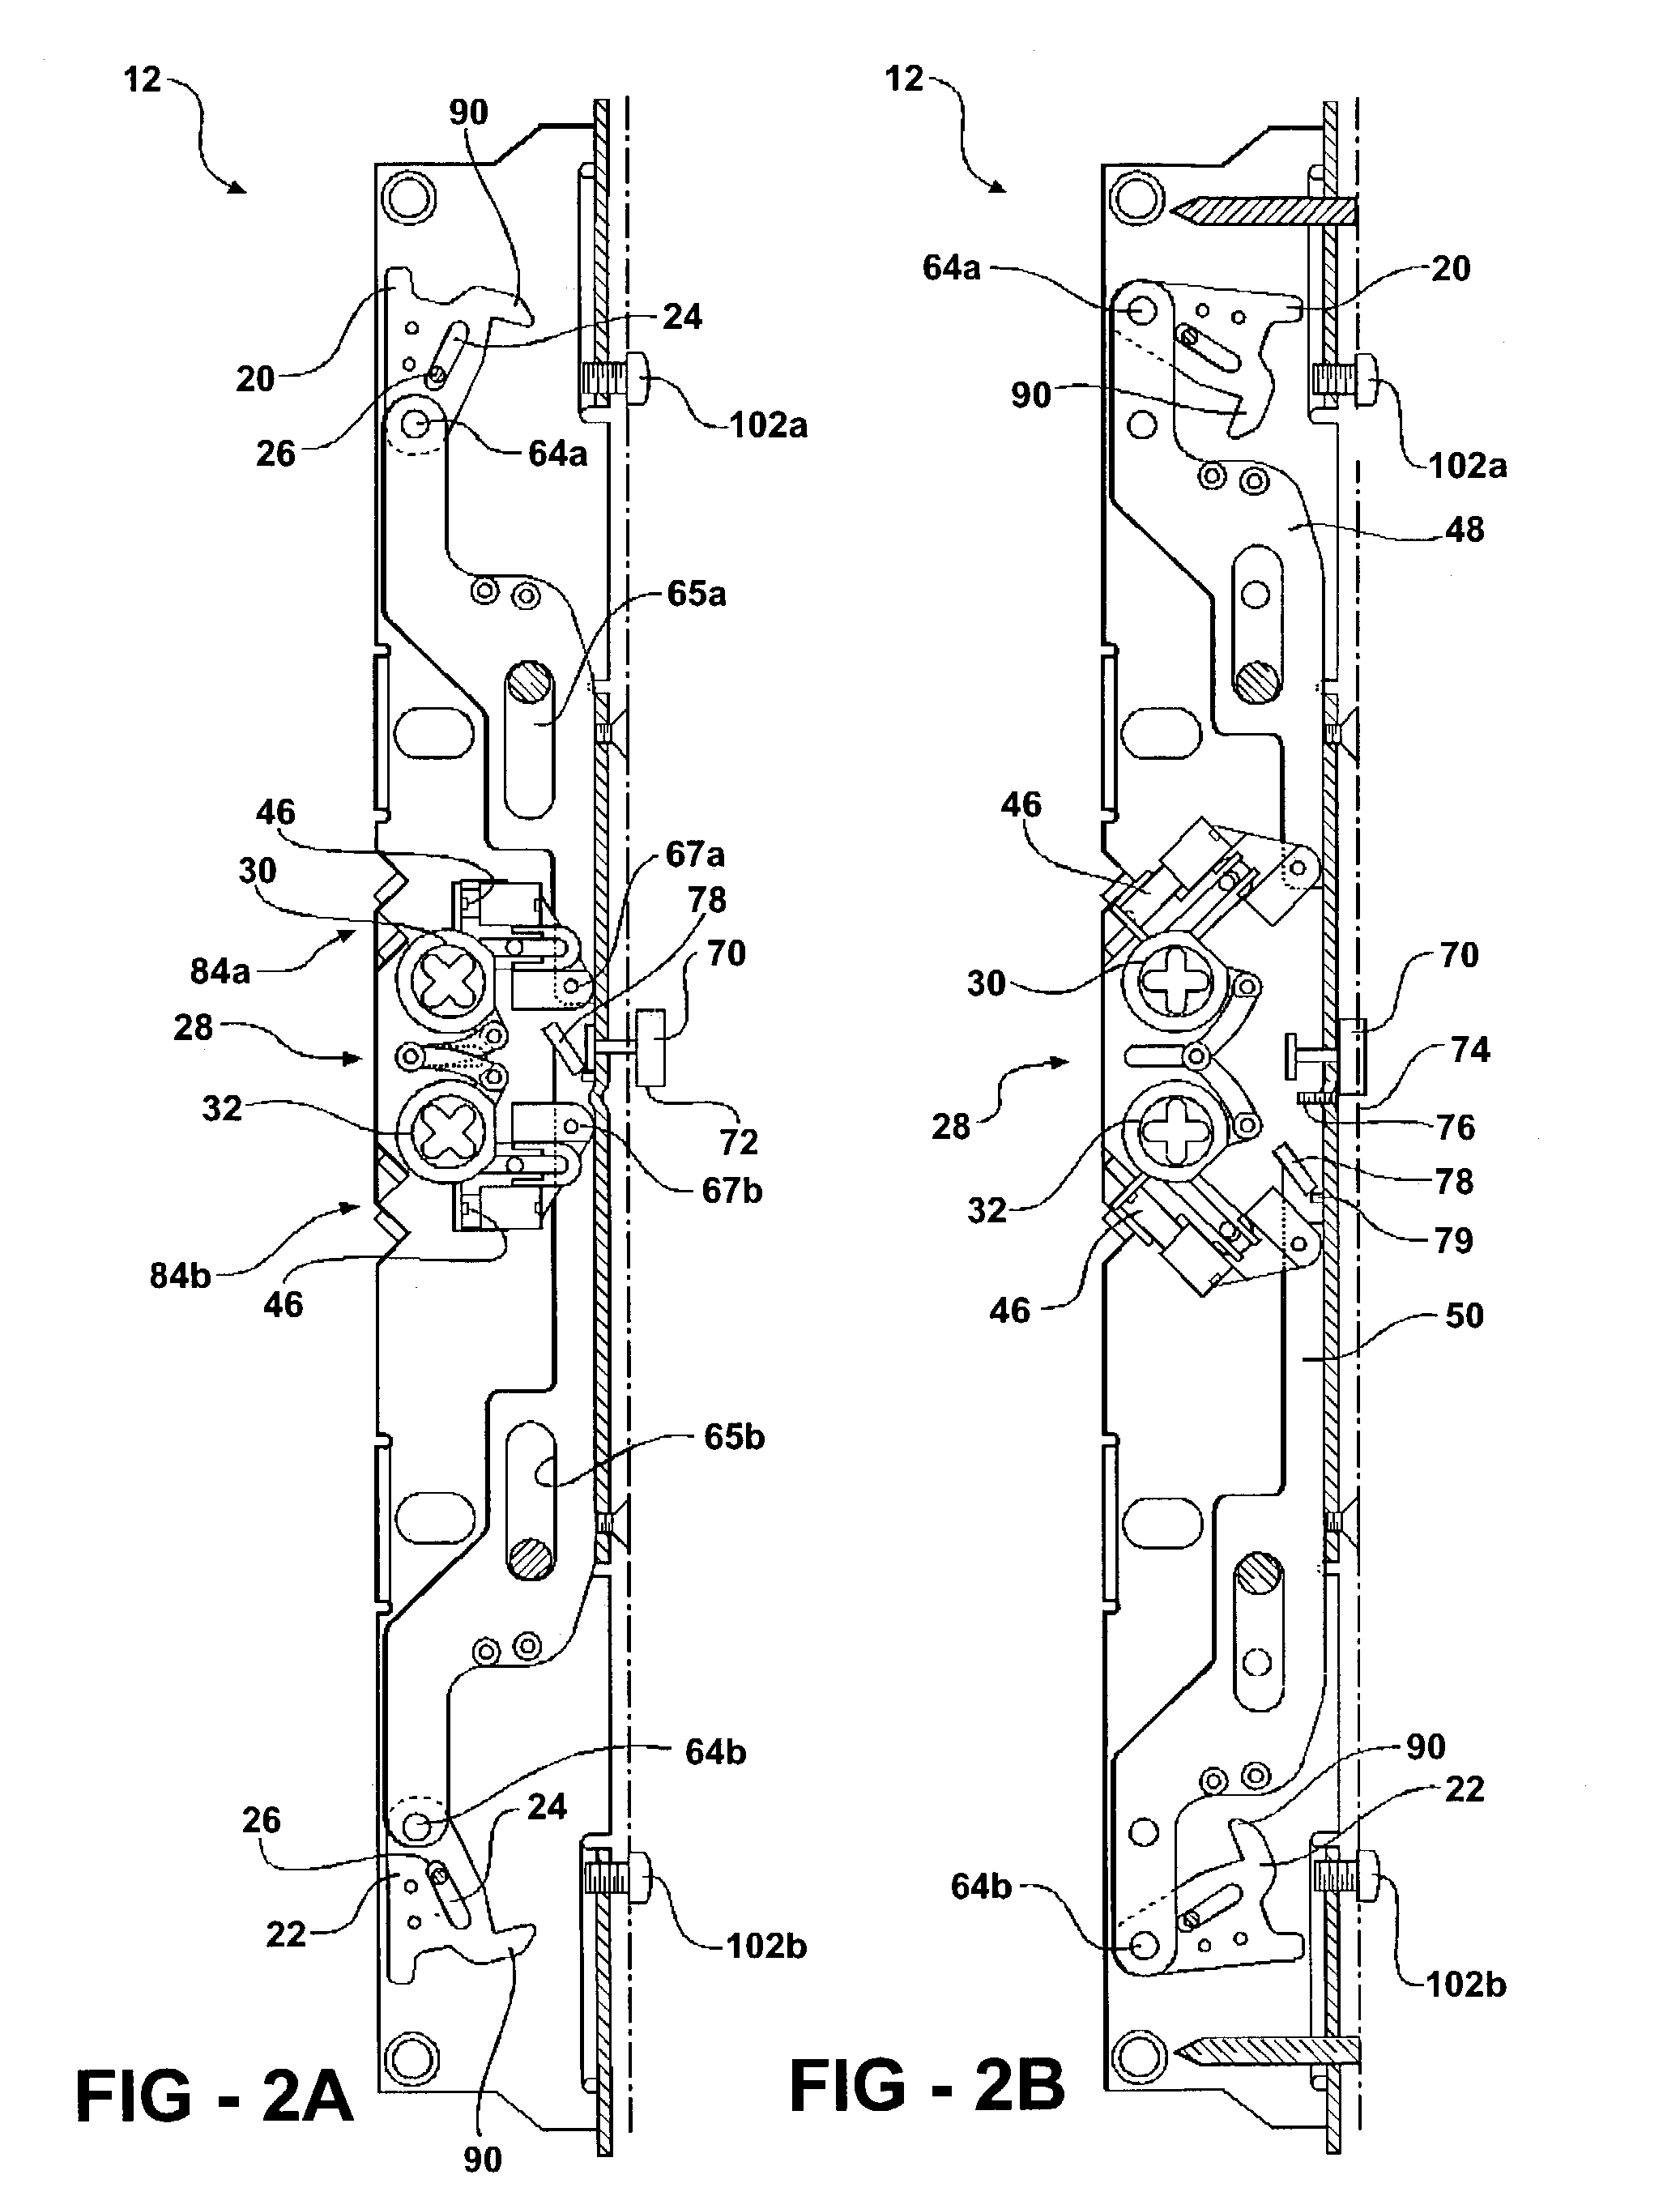 Multi-point lock assembly